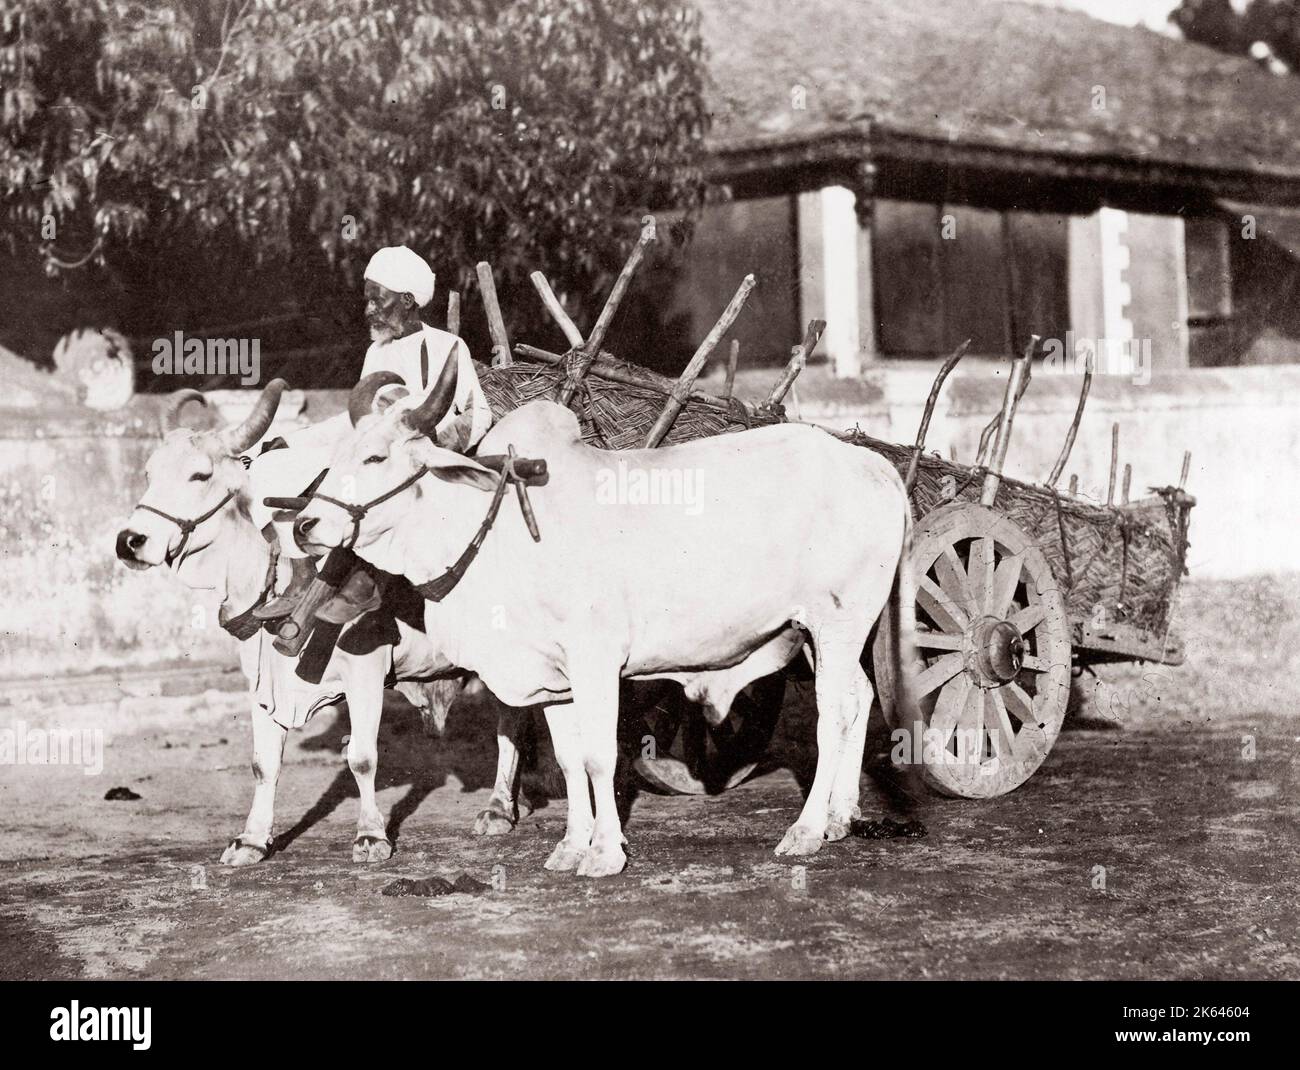 c. 1880s India - image from an album of Indian 'types' and trades' designed to illustrate India to a British viewer - ox or cattle cart Stock Photo